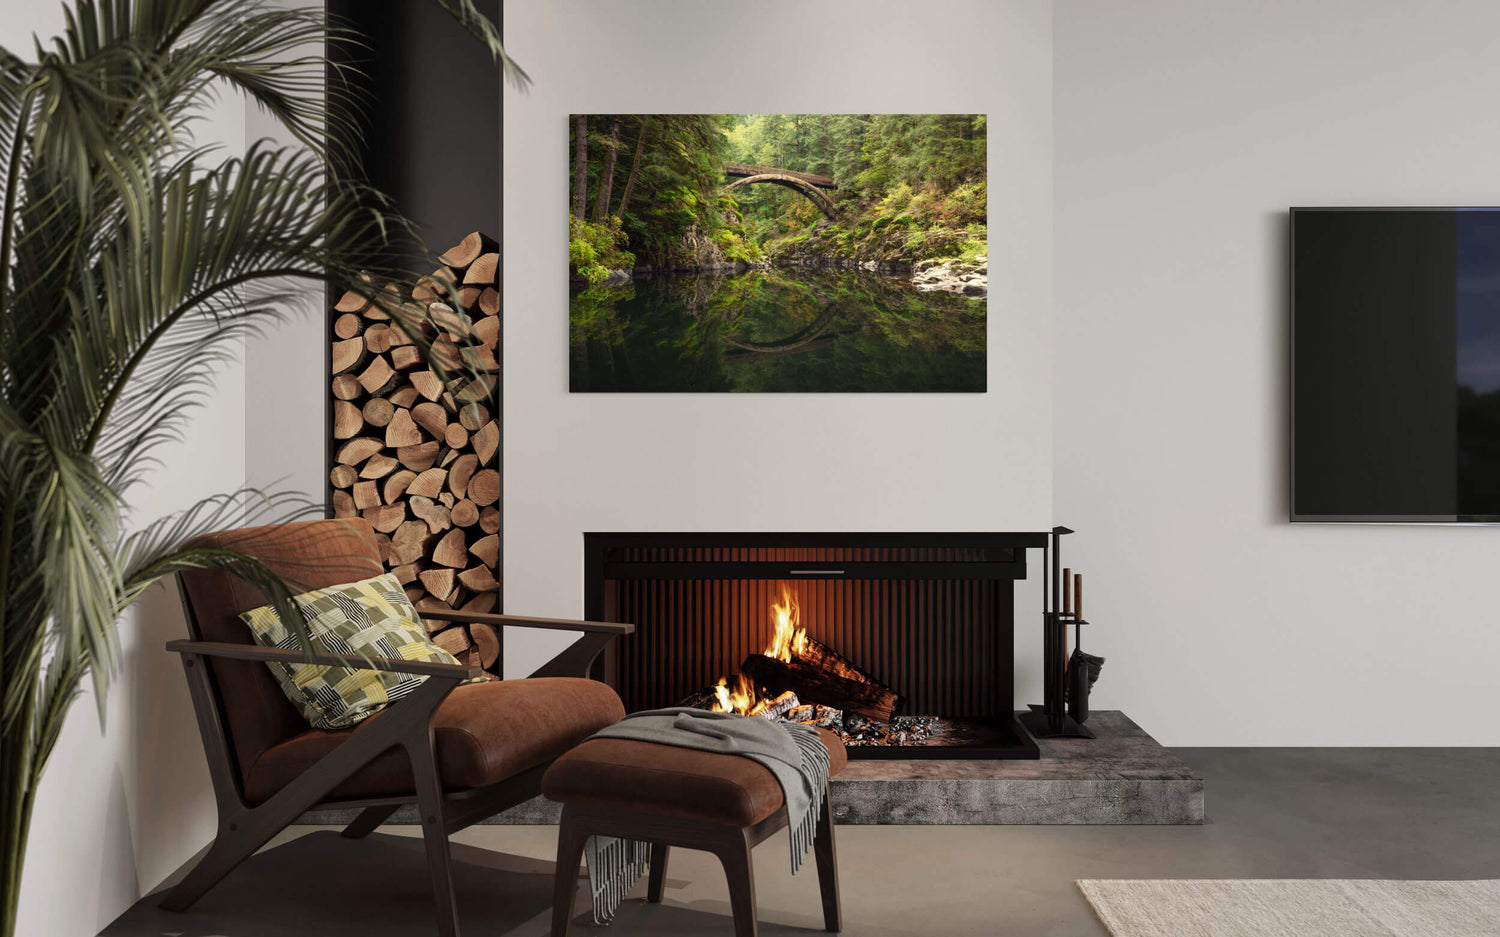 A Moulton Falls picture showing the first fall colors hangs in a living room.